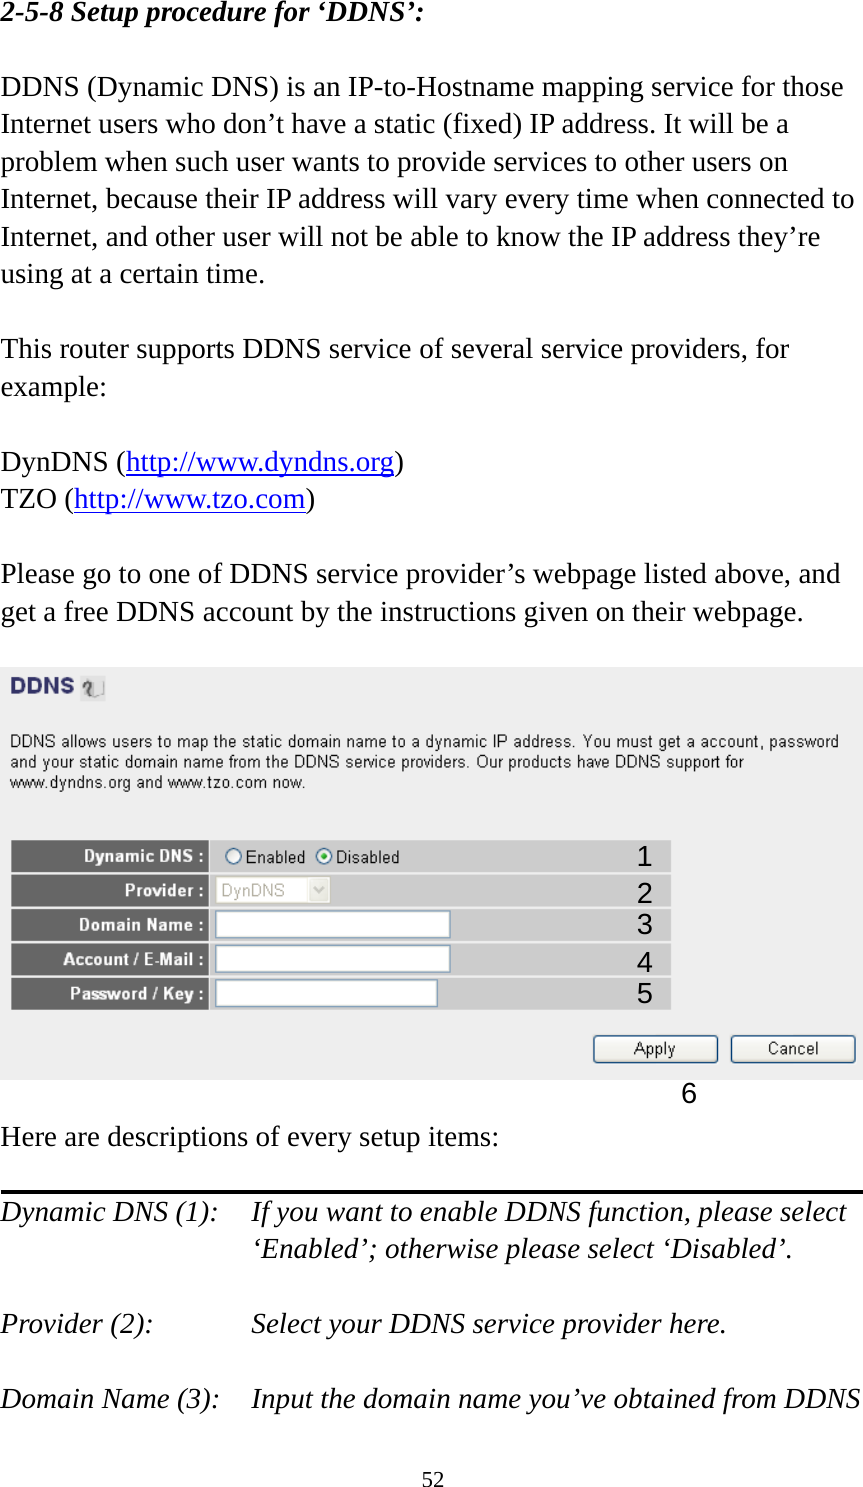 52 2-5-8 Setup procedure for ‘DDNS’:  DDNS (Dynamic DNS) is an IP-to-Hostname mapping service for those Internet users who don’t have a static (fixed) IP address. It will be a problem when such user wants to provide services to other users on Internet, because their IP address will vary every time when connected to Internet, and other user will not be able to know the IP address they’re using at a certain time.  This router supports DDNS service of several service providers, for example:  DynDNS (http://www.dyndns.org) TZO (http://www.tzo.com)  Please go to one of DDNS service provider’s webpage listed above, and get a free DDNS account by the instructions given on their webpage.    Here are descriptions of every setup items:  Dynamic DNS (1):    If you want to enable DDNS function, please select ‘Enabled’; otherwise please select ‘Disabled’.  Provider (2):      Select your DDNS service provider here.  Domain Name (3):    Input the domain name you’ve obtained from DDNS 1 2345 6 